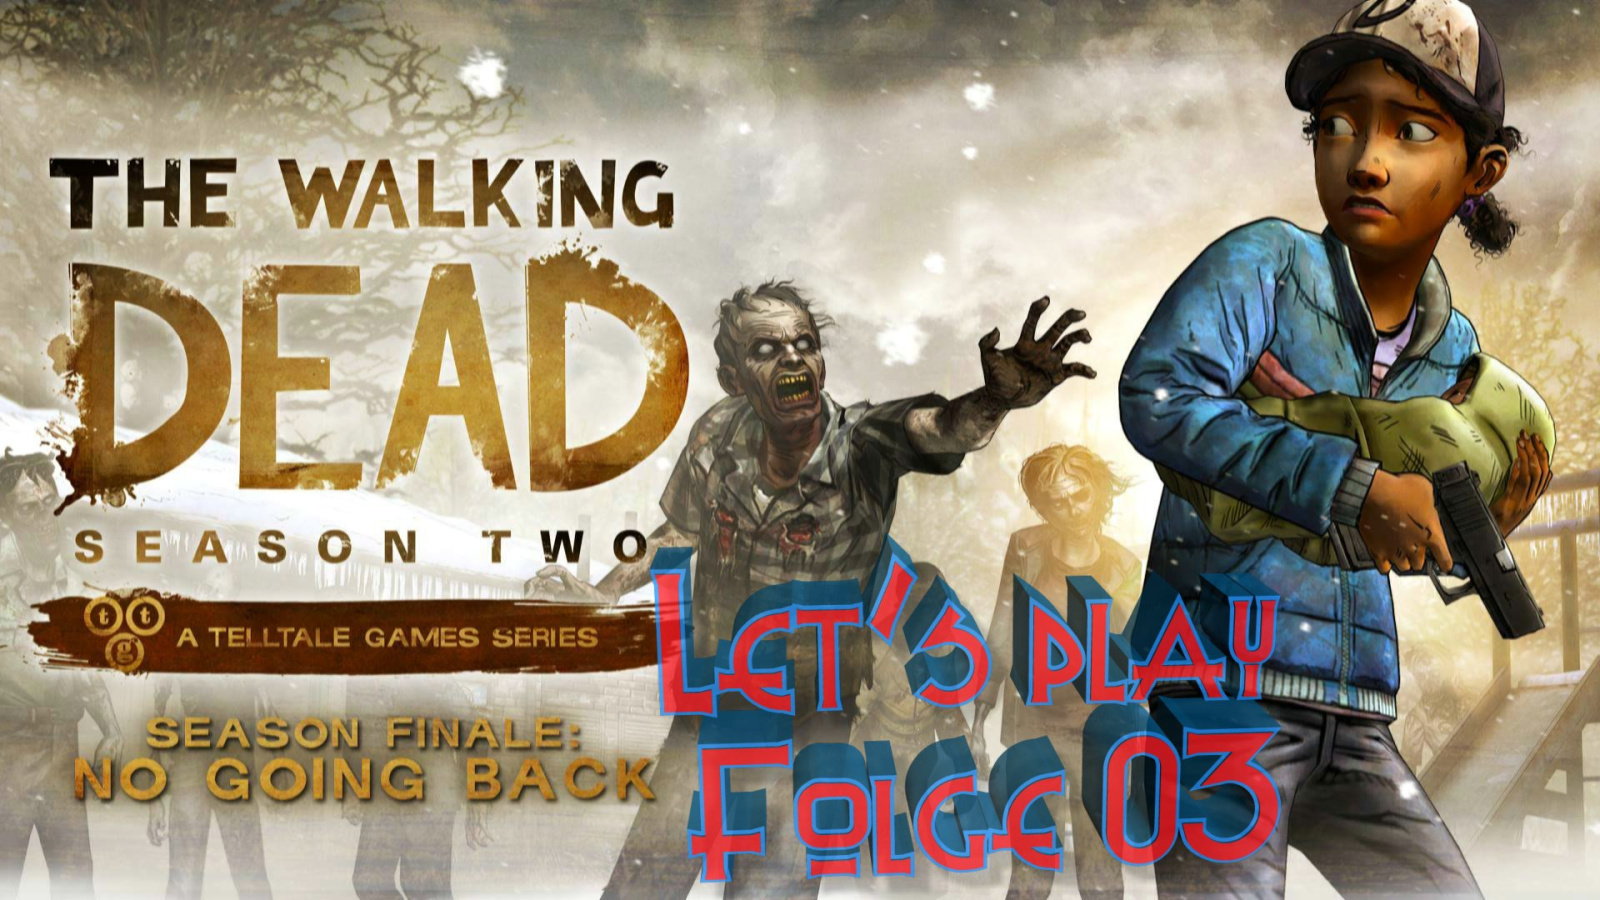 The Walking Dead: No Going Back – Let’s play 03